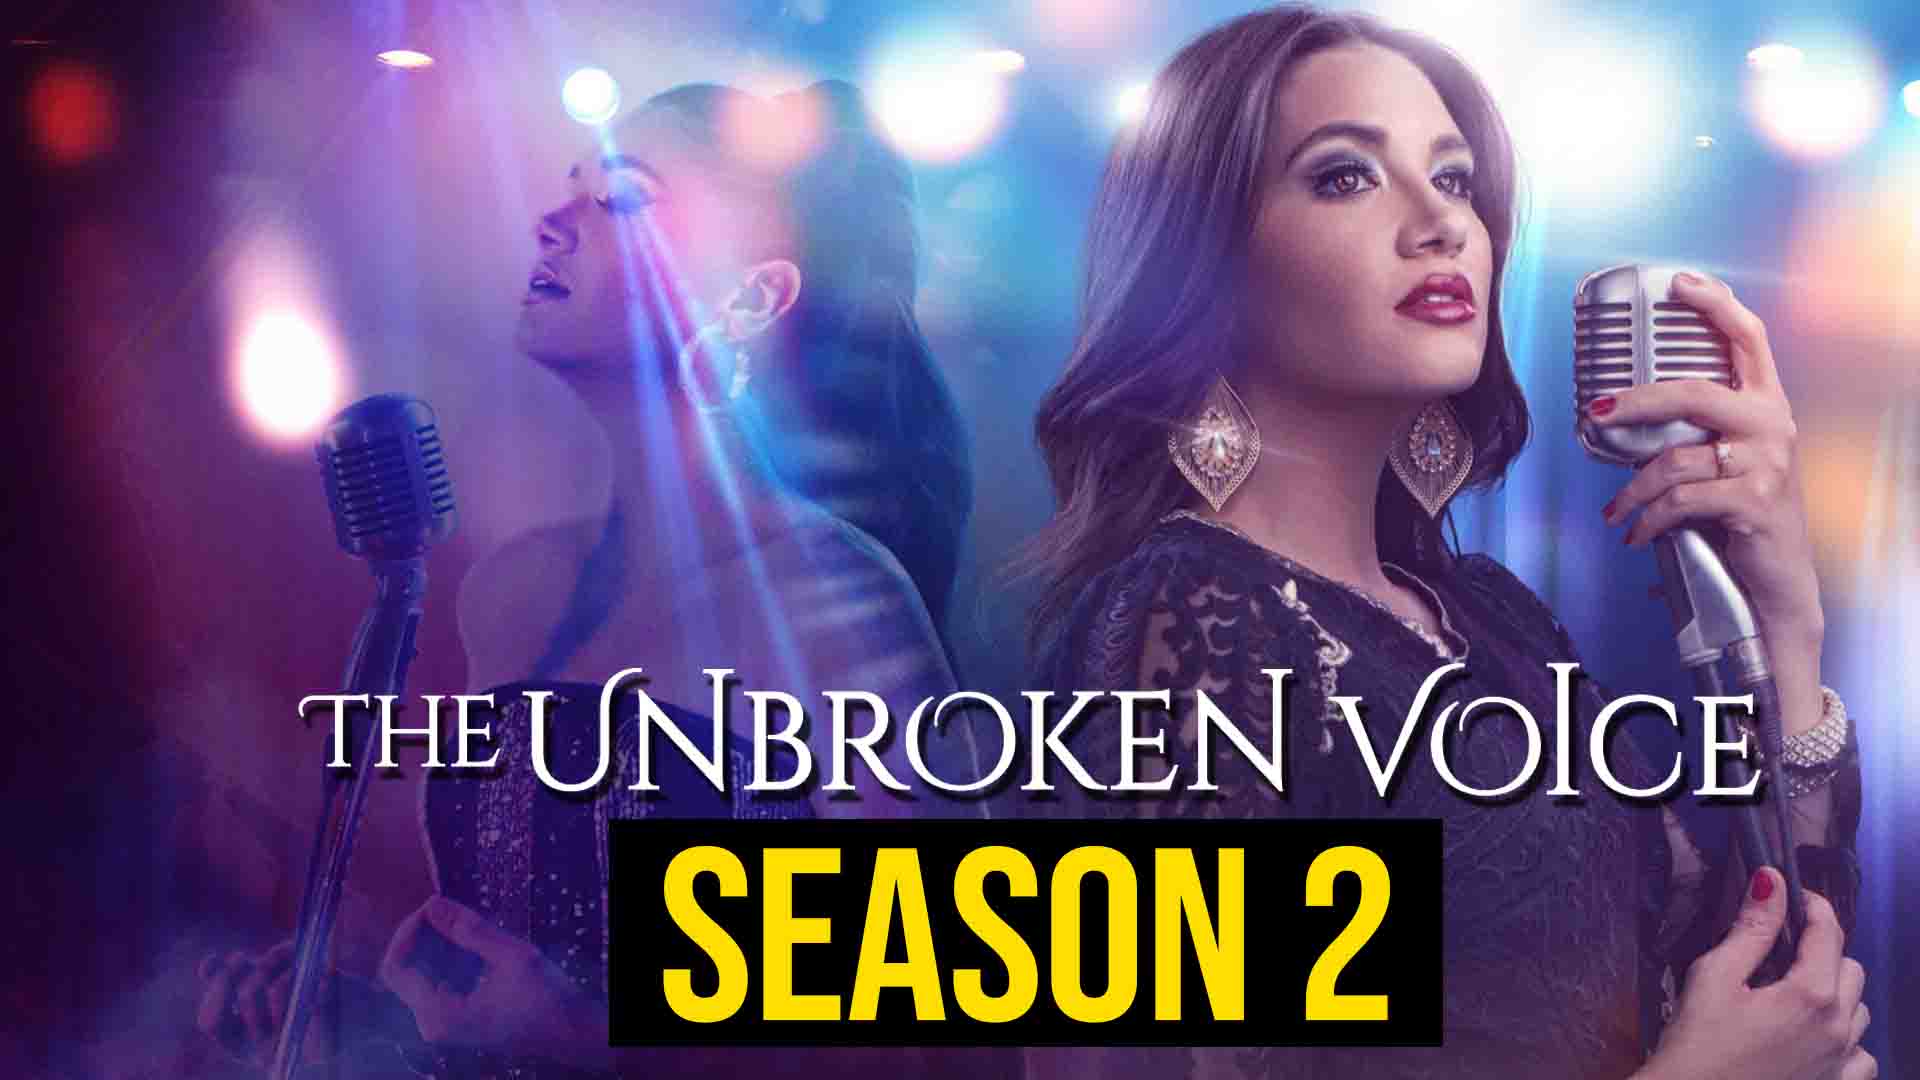 The Unbroken Voice Season 2 “Confirm” Release Date And More!